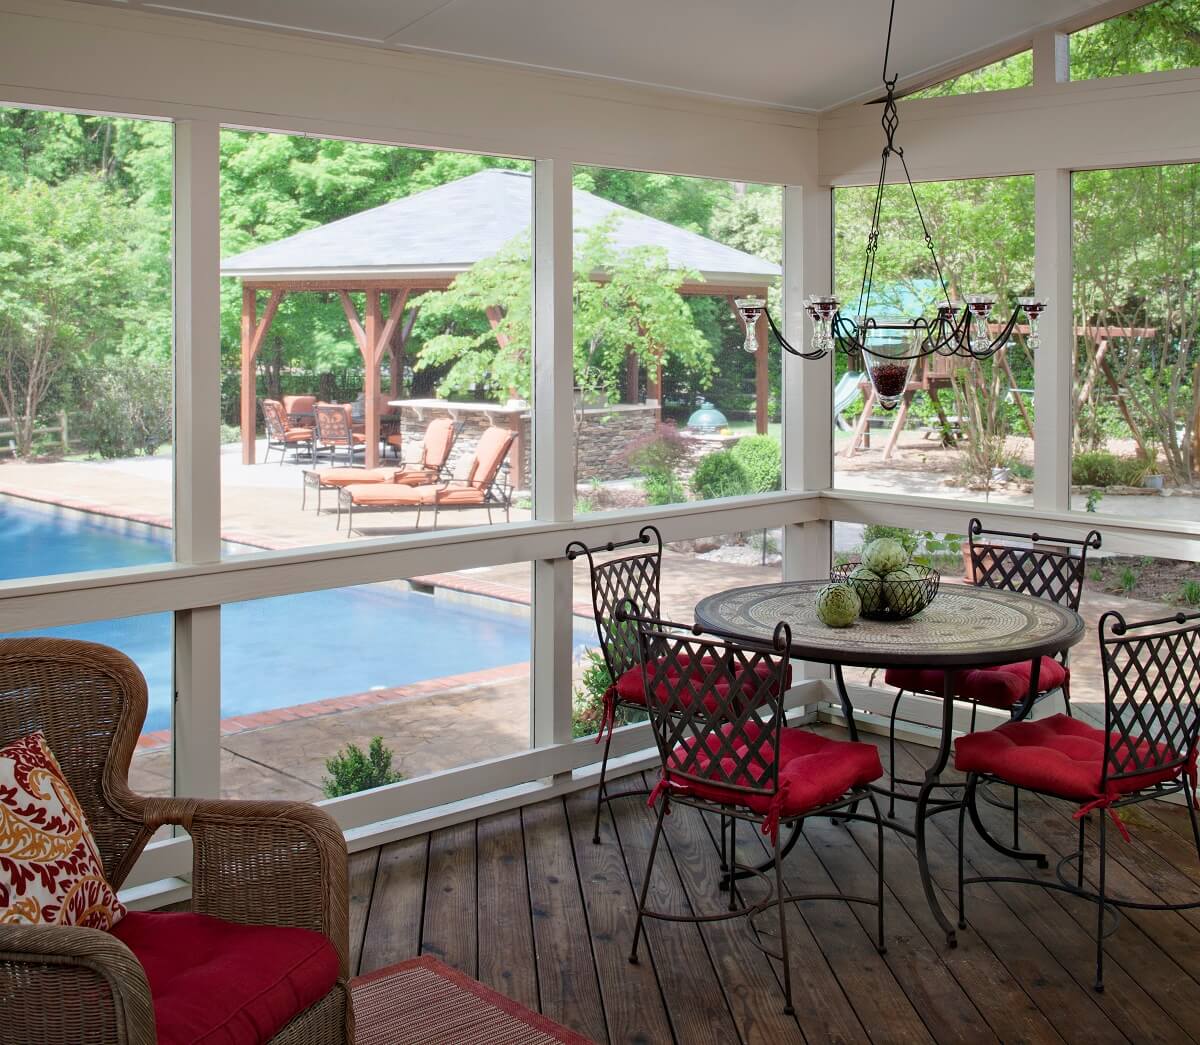 Screened porch with swimming pool view